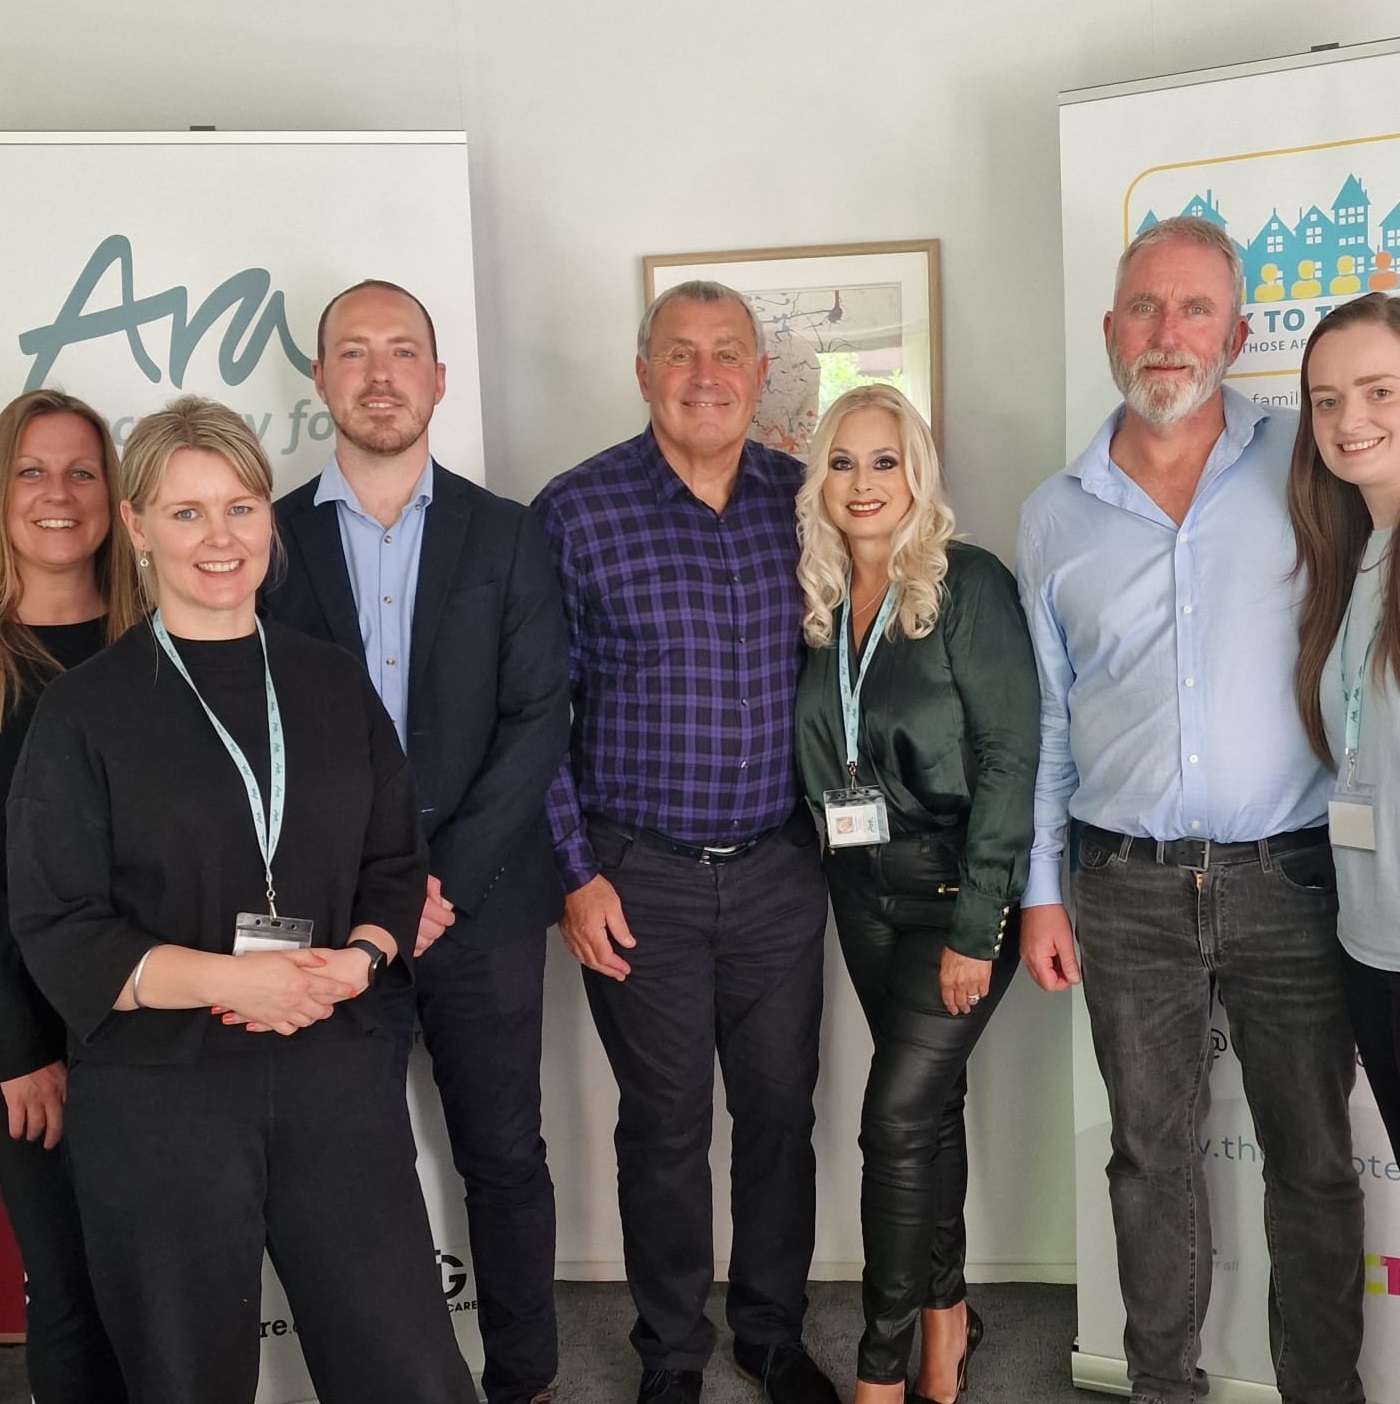 The Six To Ten project team with Peter Shilton and Steph Shilton